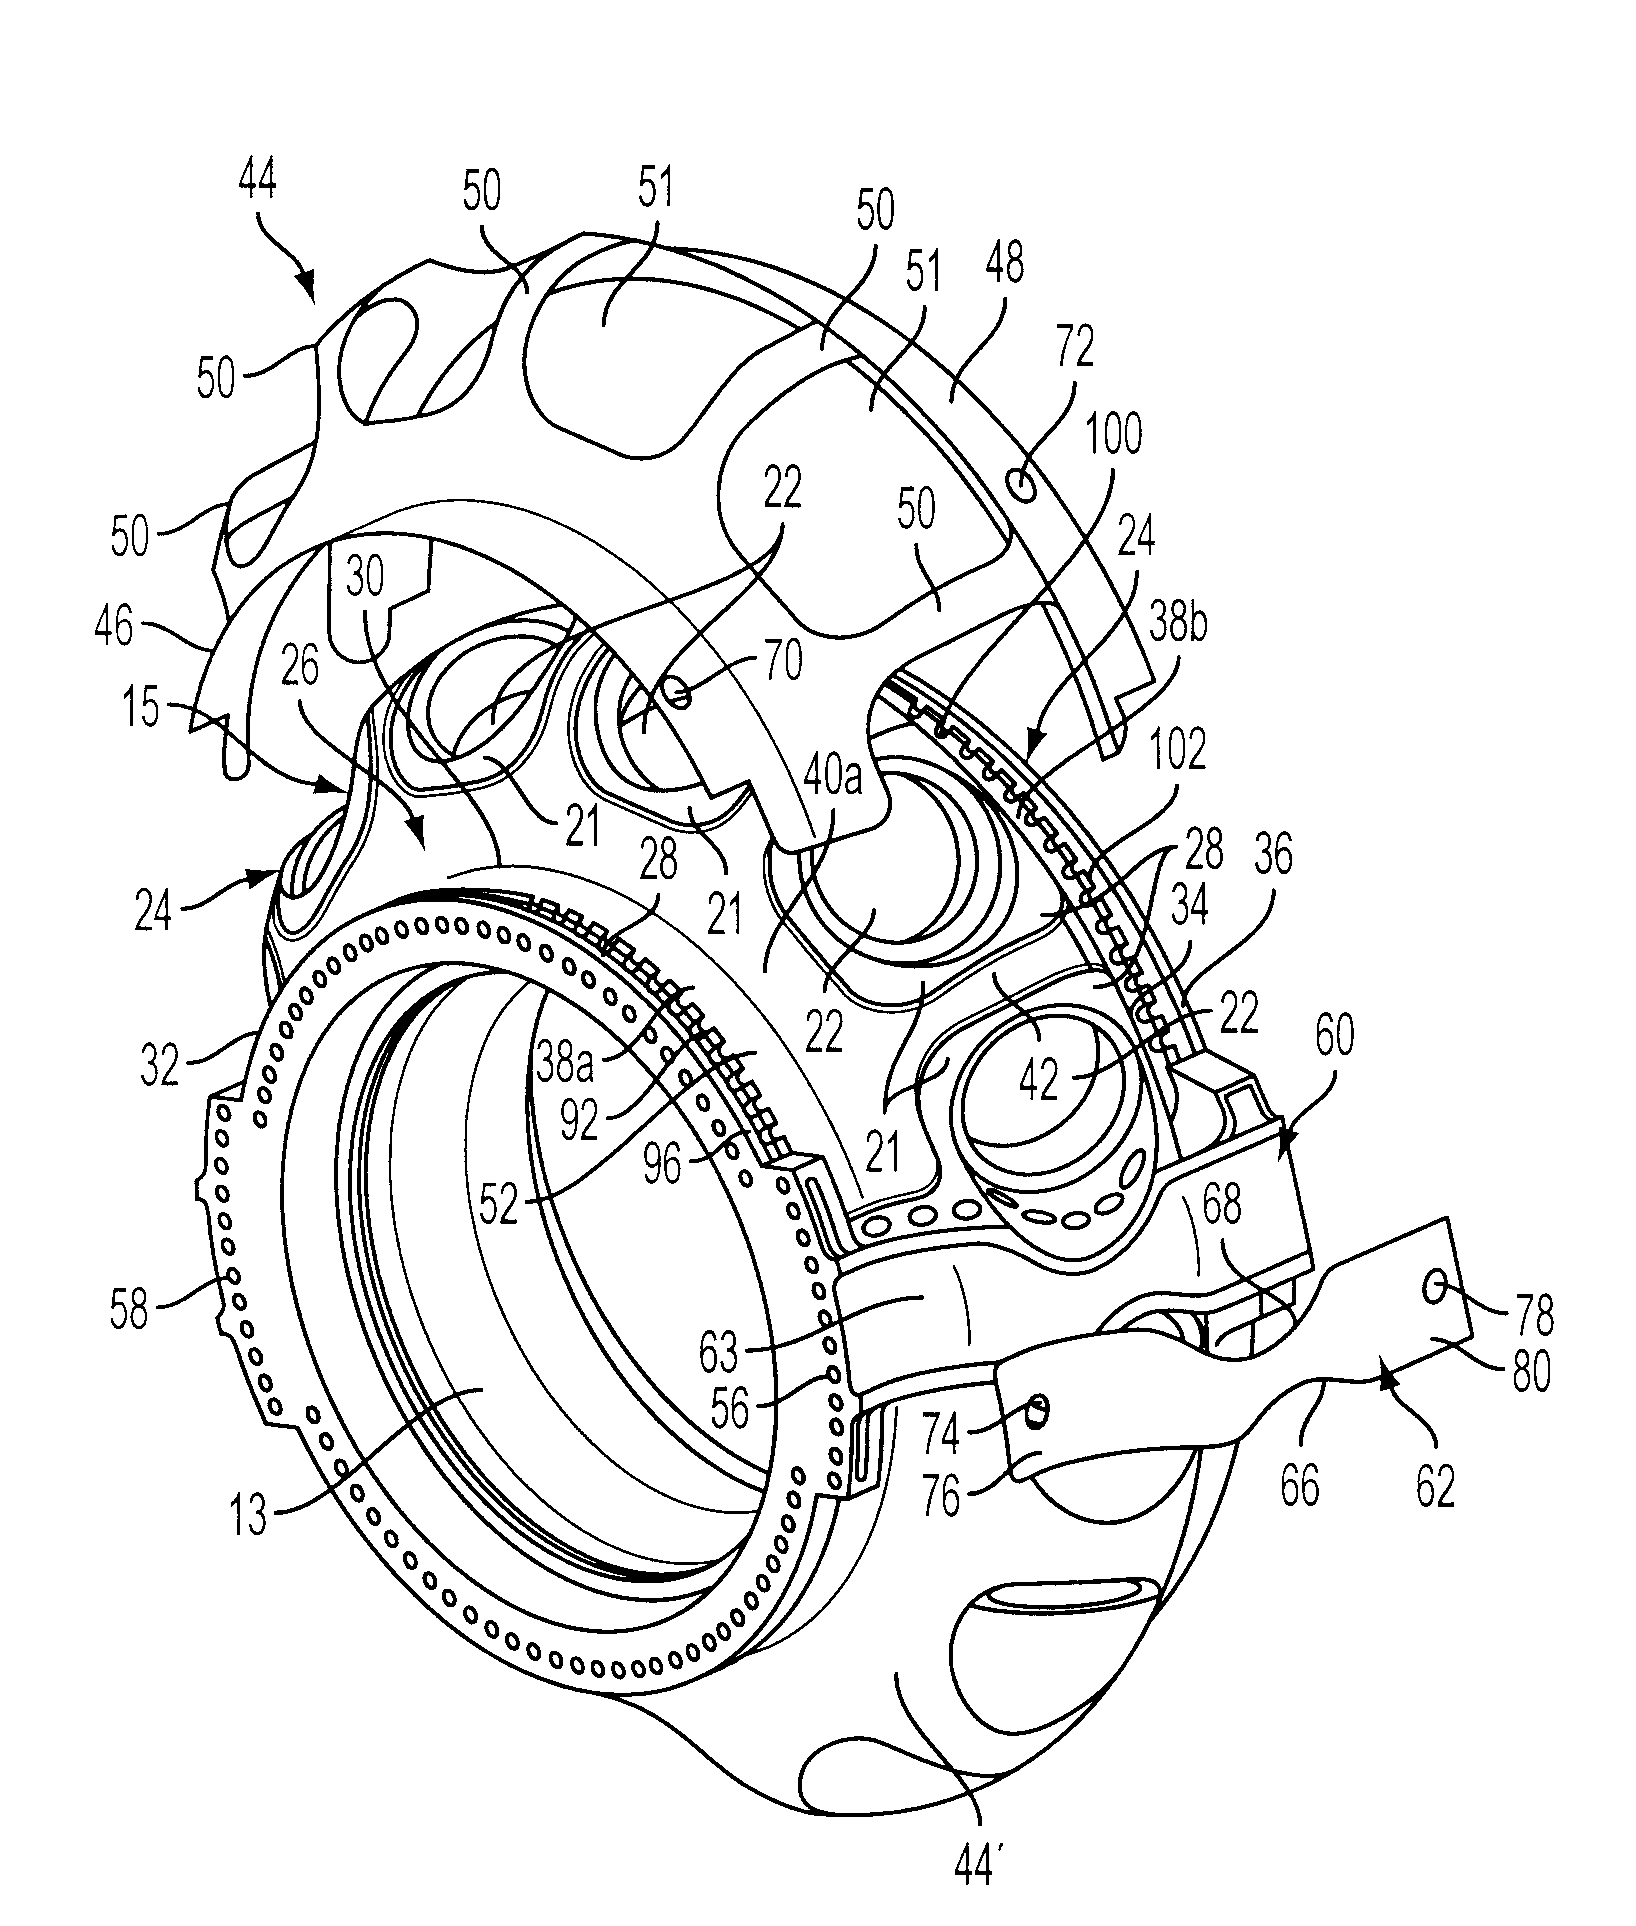 Cooling structure for outer surface of a gas turbine case